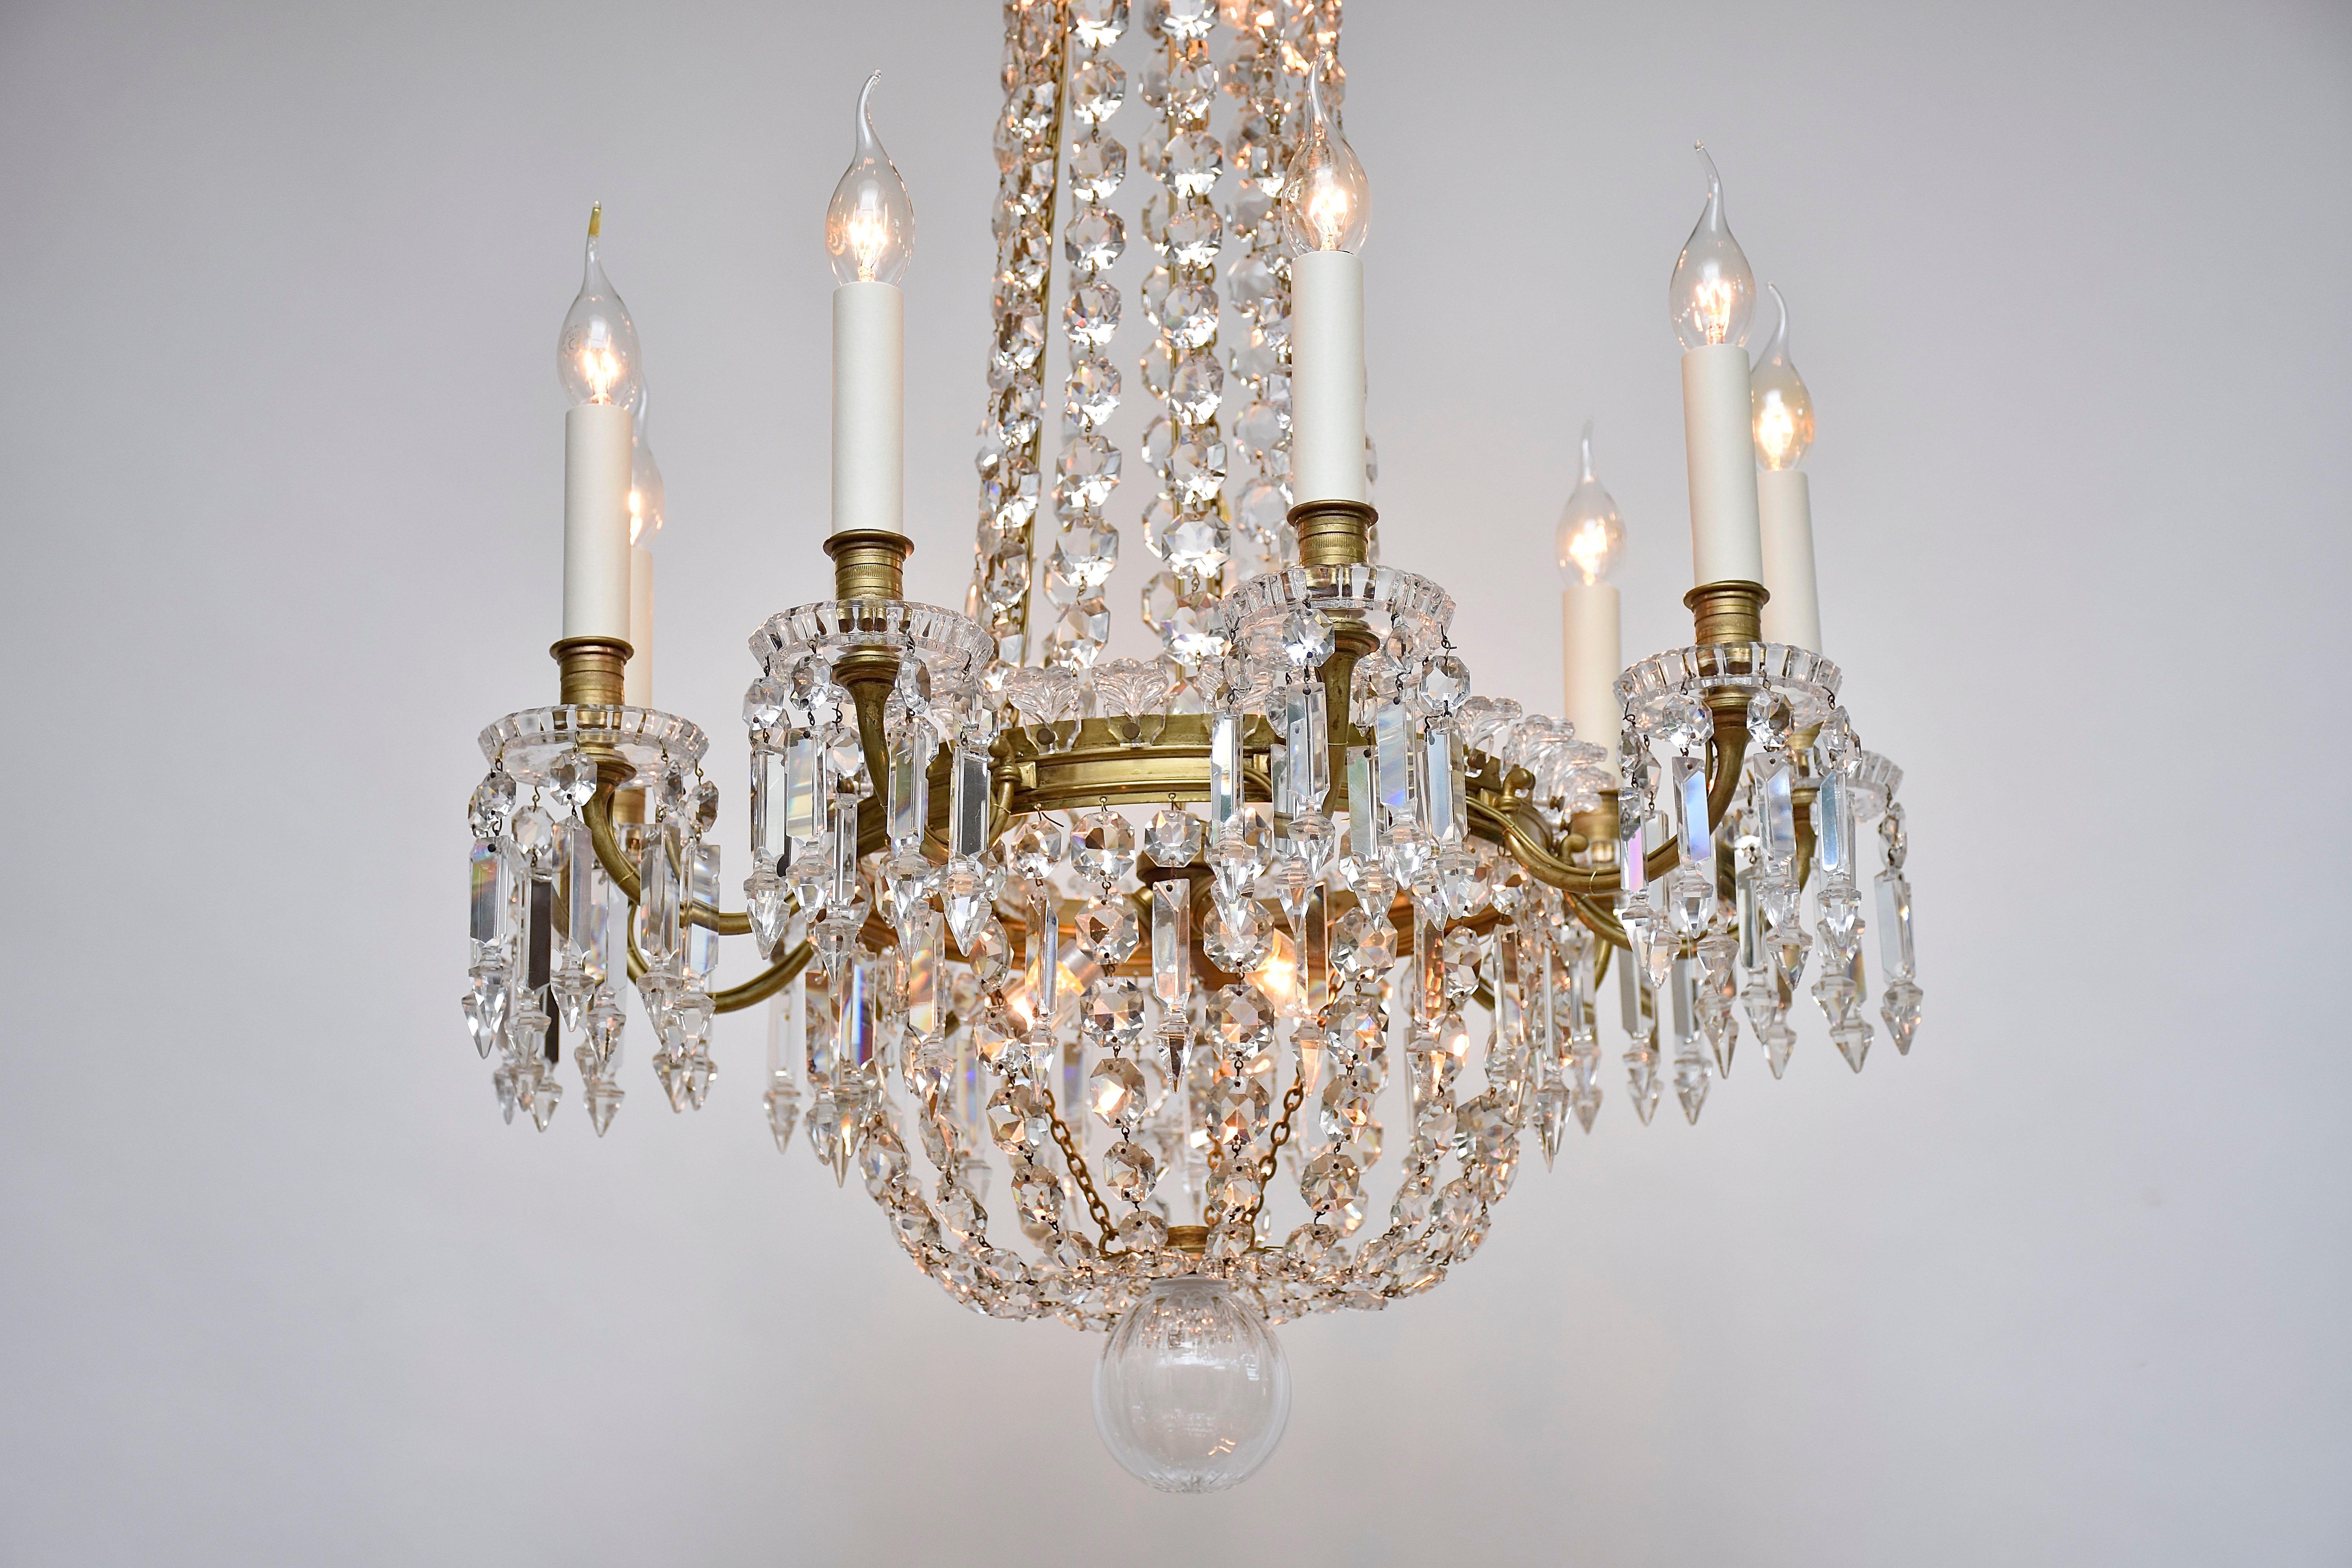 Beautiful French gilt bronze Baccarat chandelier. 
With 9 candle arms around the chandelier and 5 lights inside.
Decorated with strings of faceted Baccarat octagons and drops.
The crown and central ring decorated with mounted acanthus